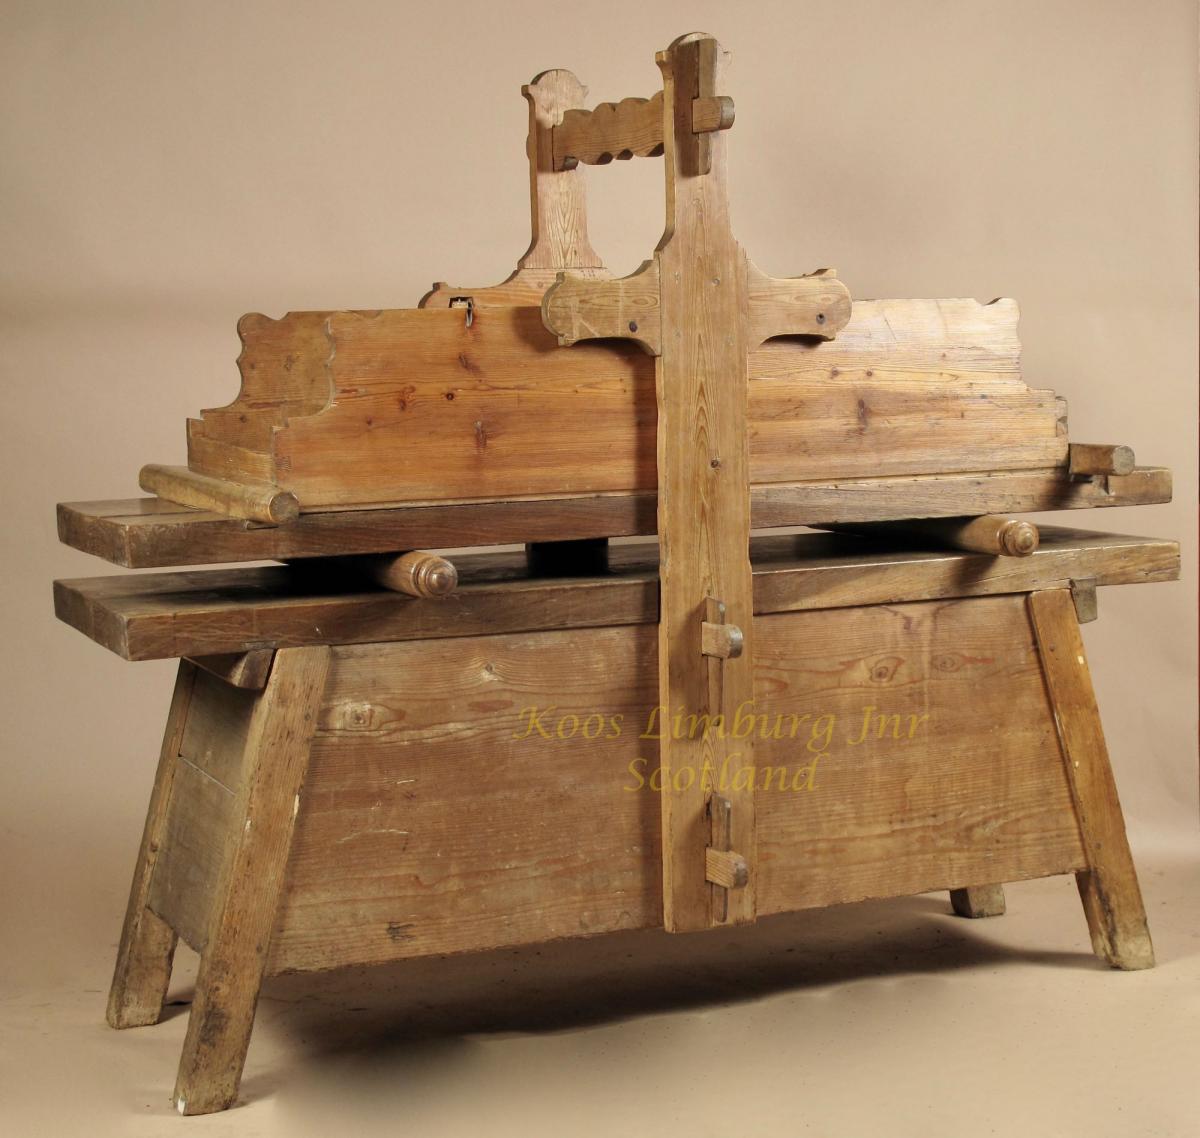 A Very Rare Wooden Mangling Table, For Mangling (ironing) Linen.  Anglo Dutch.  19th Century. 